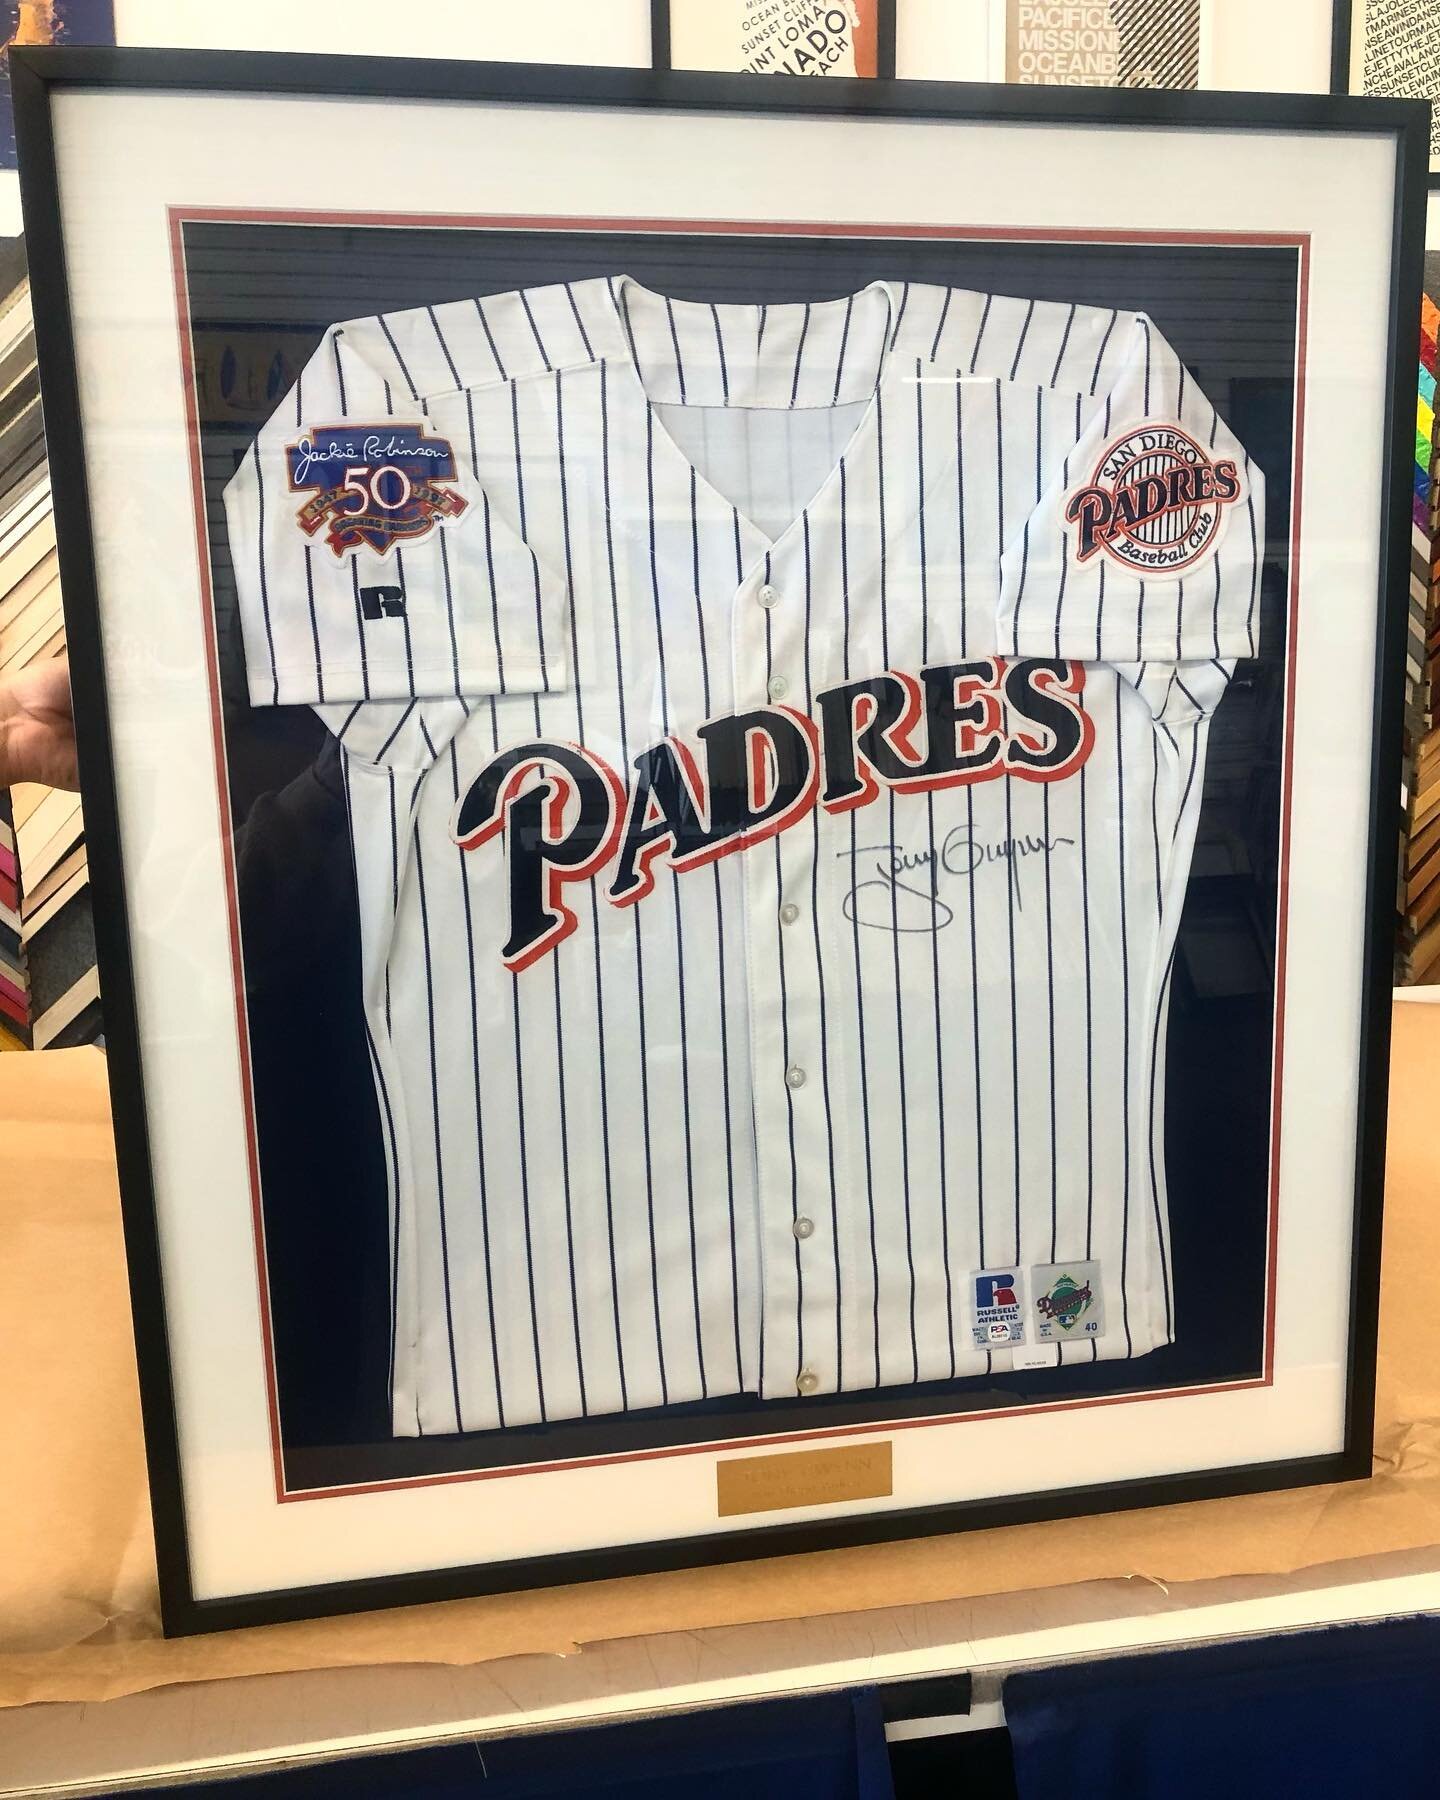 Hope everyone is having a great weekend and a good time at @padres fan fest! We will be framing up cool stuff like this autographed Tony Gwynn jersey until 5! ⚾️ 
&bull;&bull;
&bull;&bull;&bull;
&bull;&bull;
#aztecgraphics #pacificbeach #pacificbeach